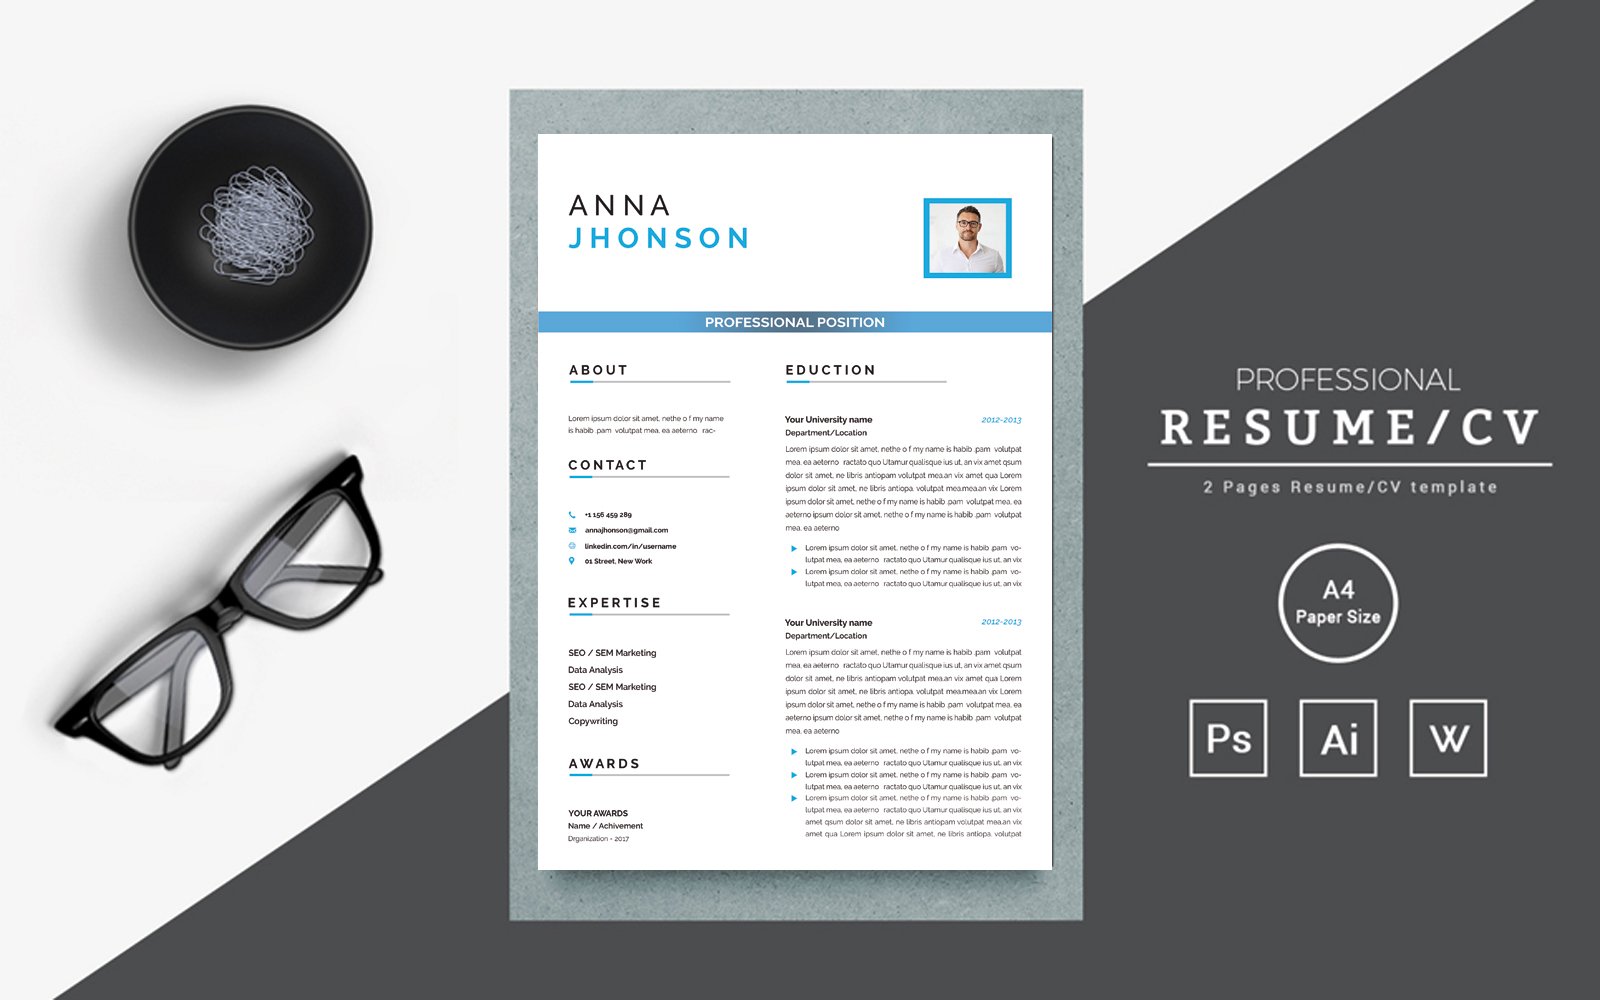 Template #352452 Resume Template Webdesign Template - Logo template Preview